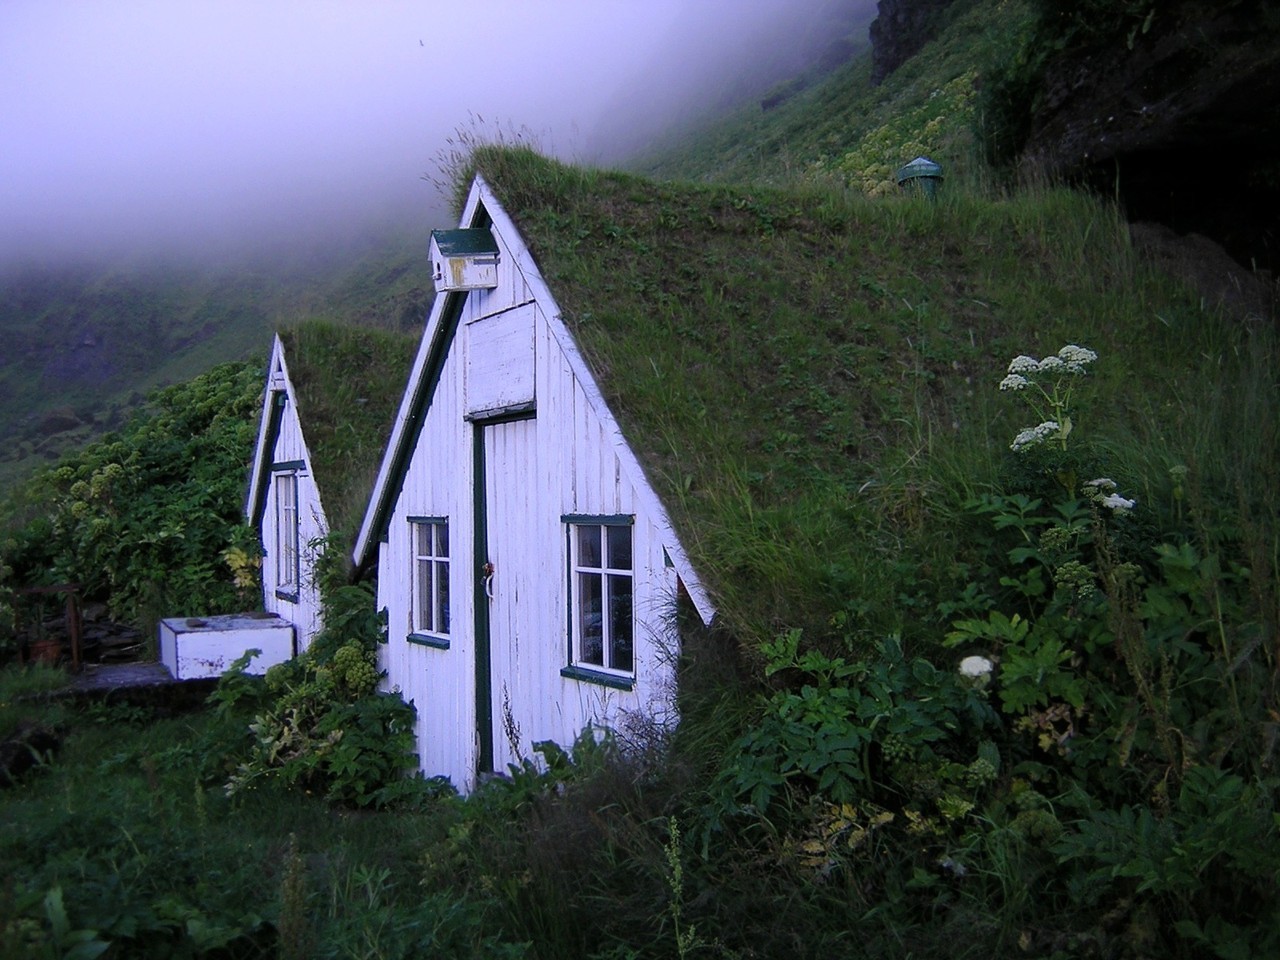  Sod roof houses in Vik, Iceland. Photo by Gilles Baldet. The birdhouses are my favorite